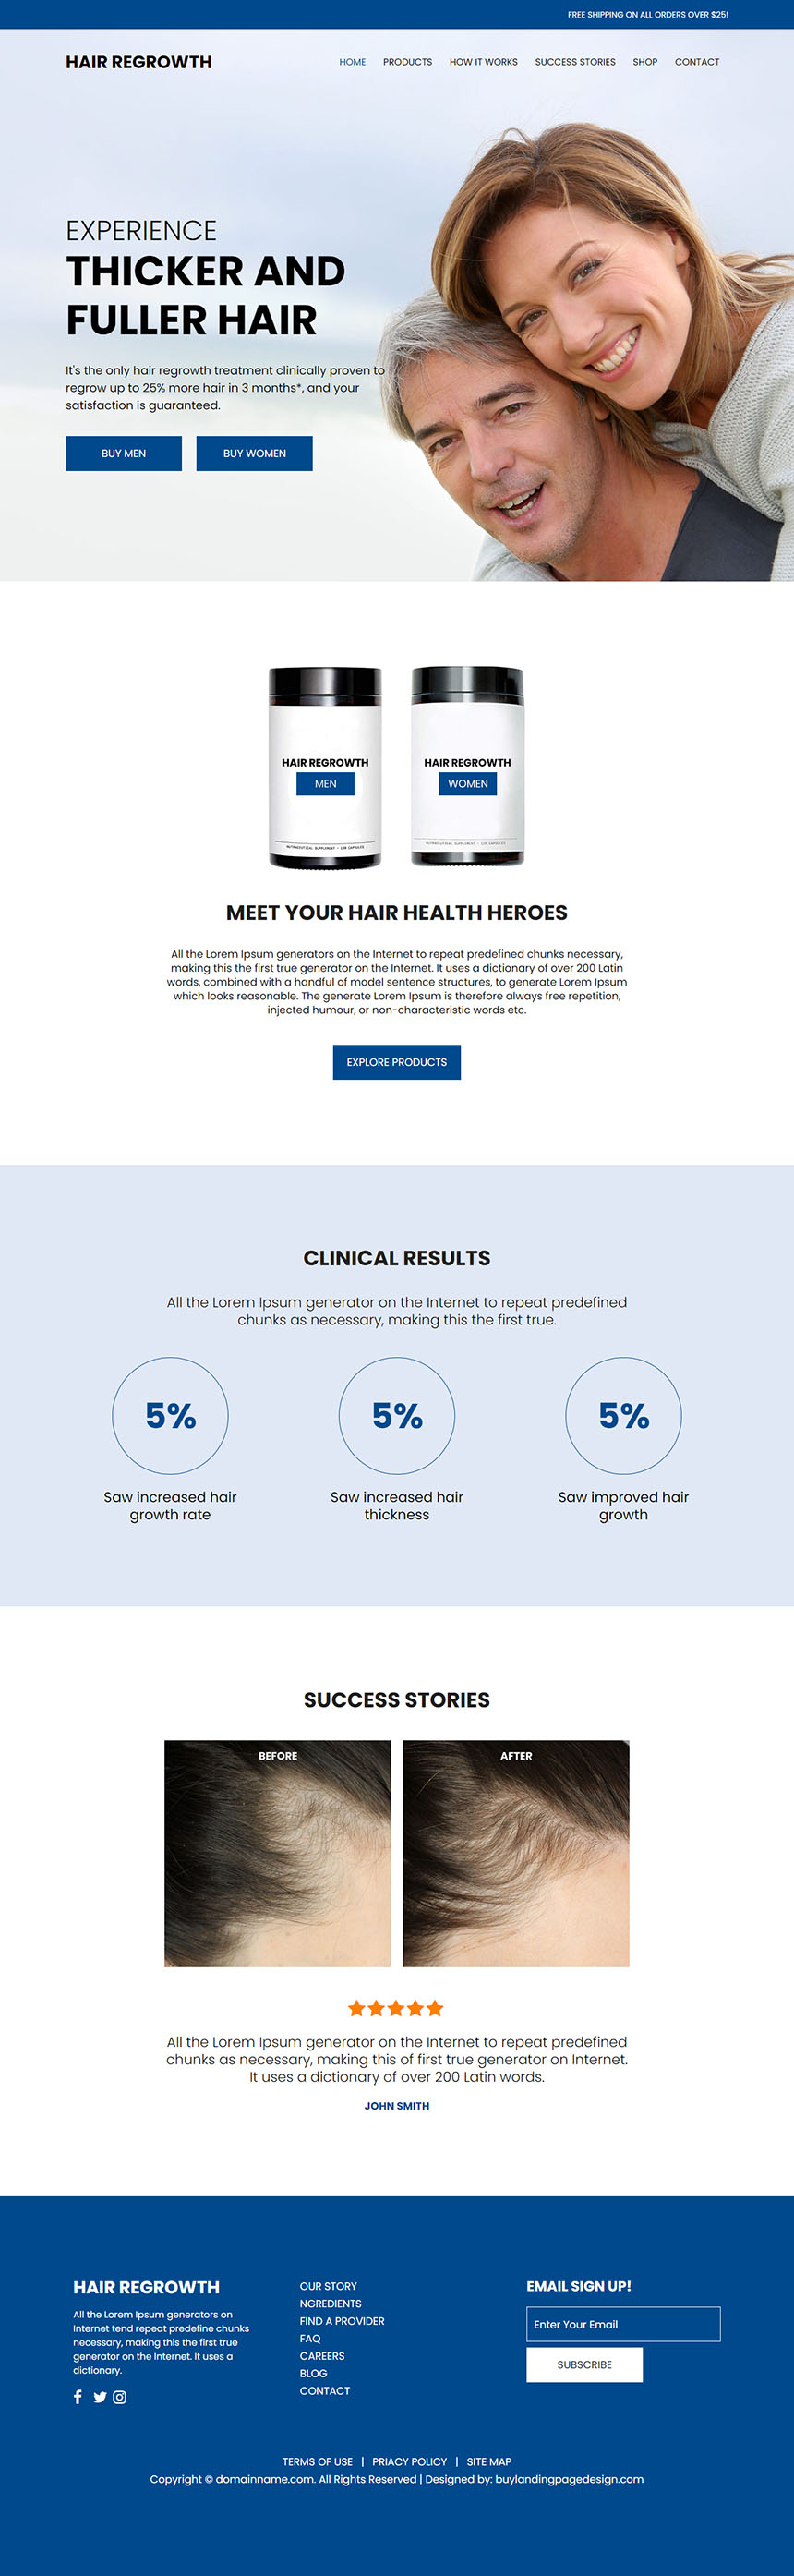 hair regrowth product selling responsive website design